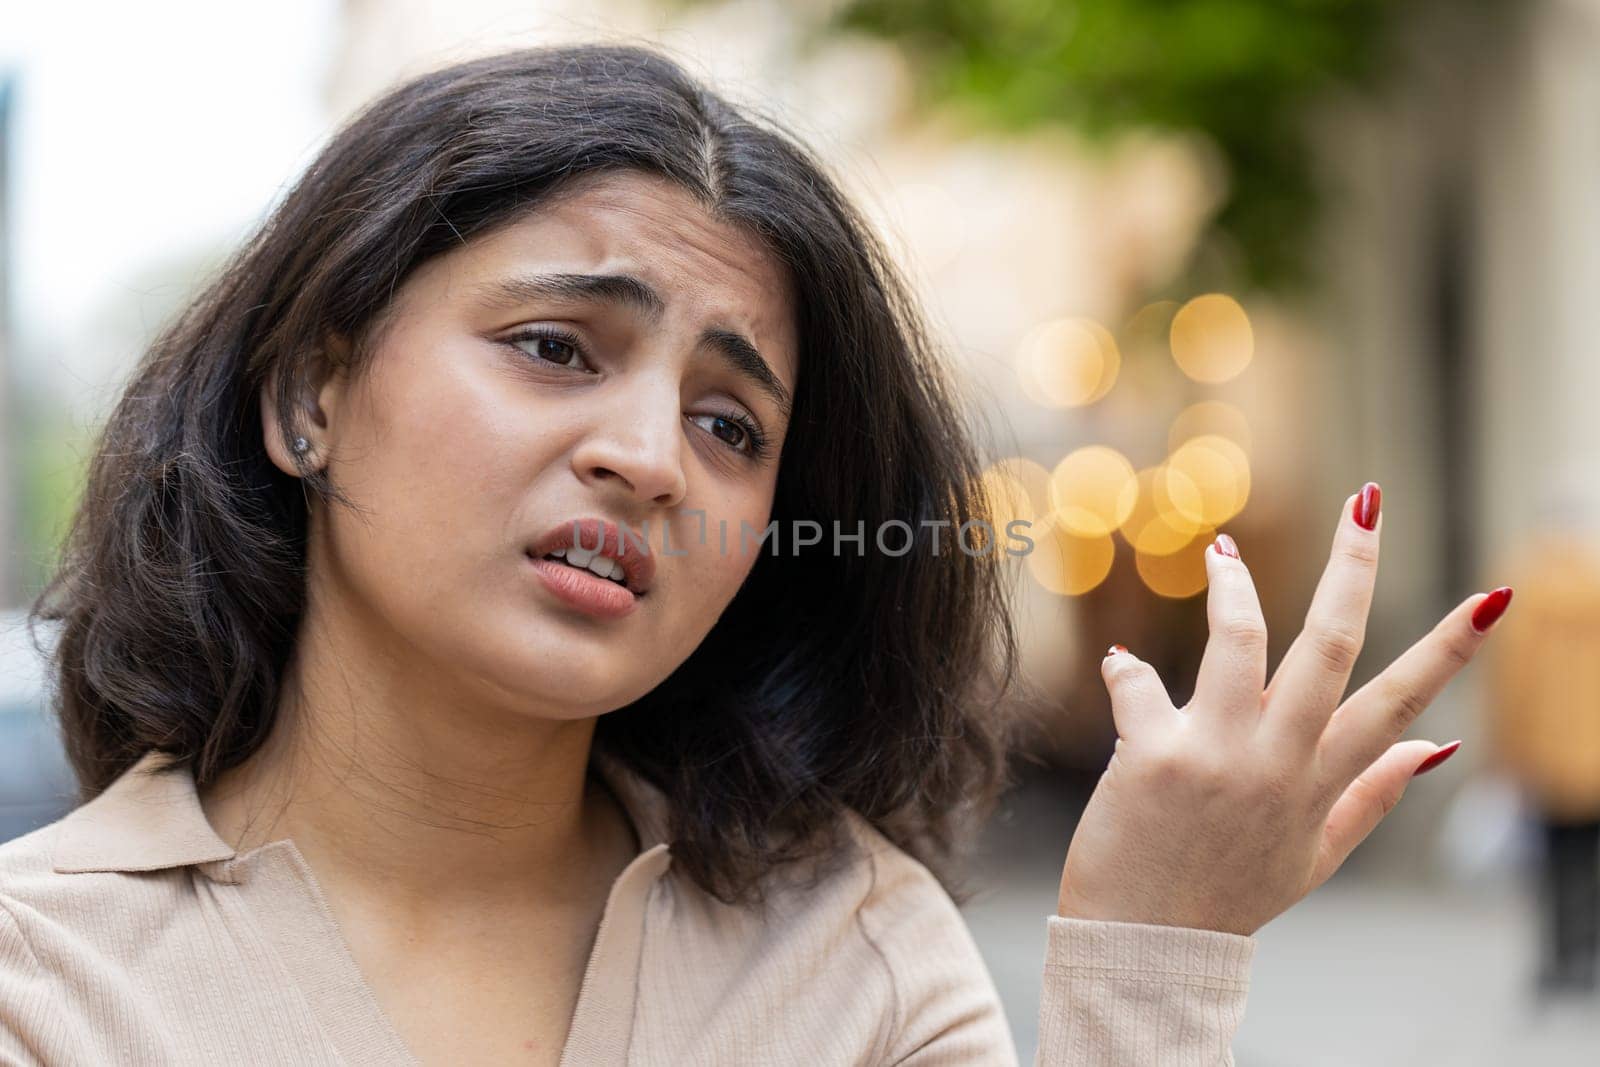 Sad unhappy Indian young woman thinks over life concerns suffers from unfair situation outdoors. Problem feeling bad annoyed burnout grief. Hispanic girl alone on urban city street. Town lifestyles